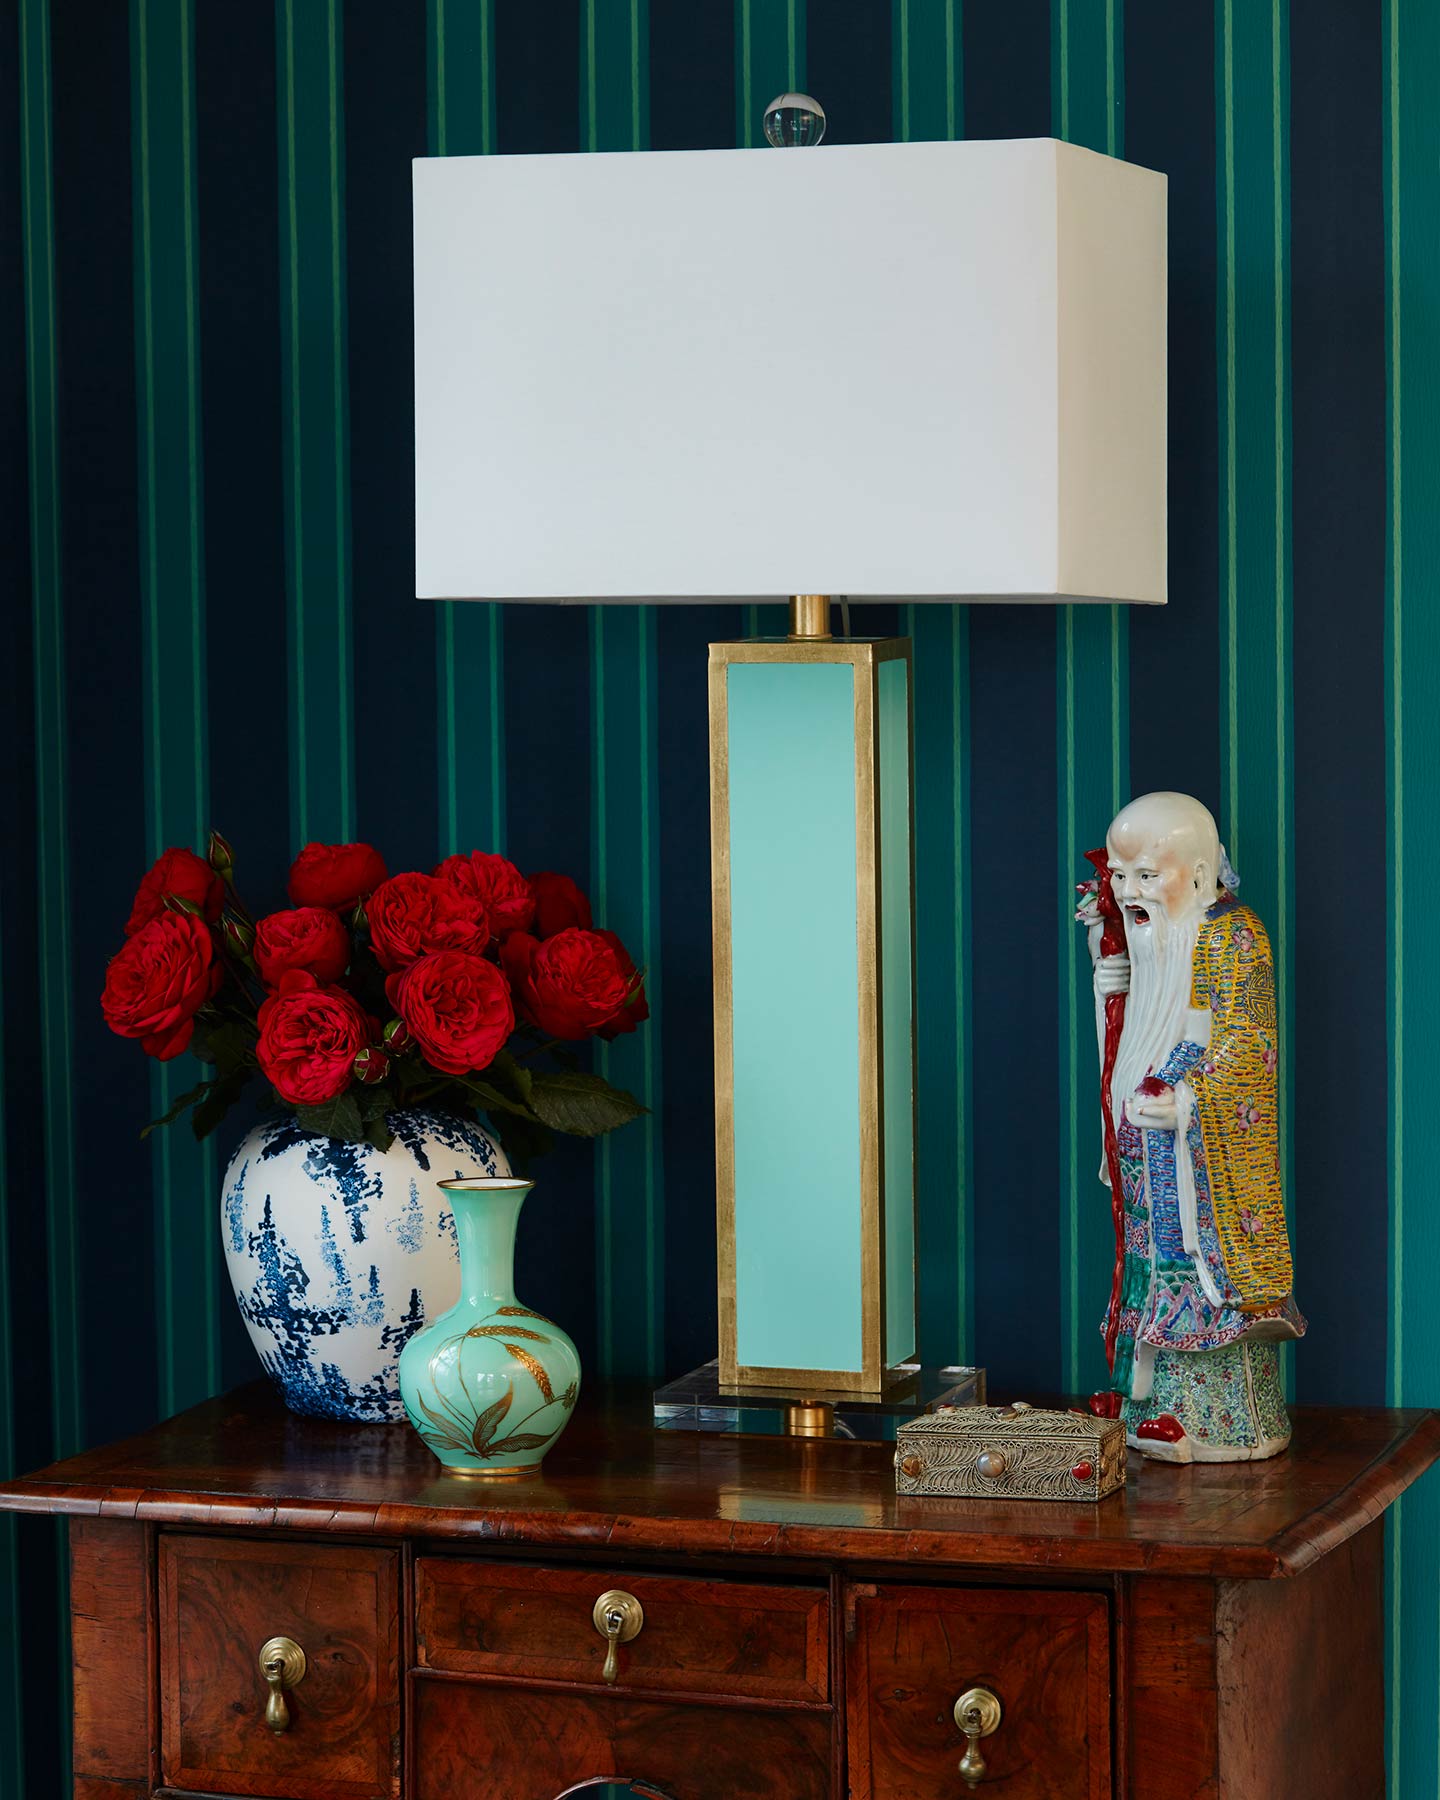 Catalog photograph featuring a colorful lamp in a stylish interior